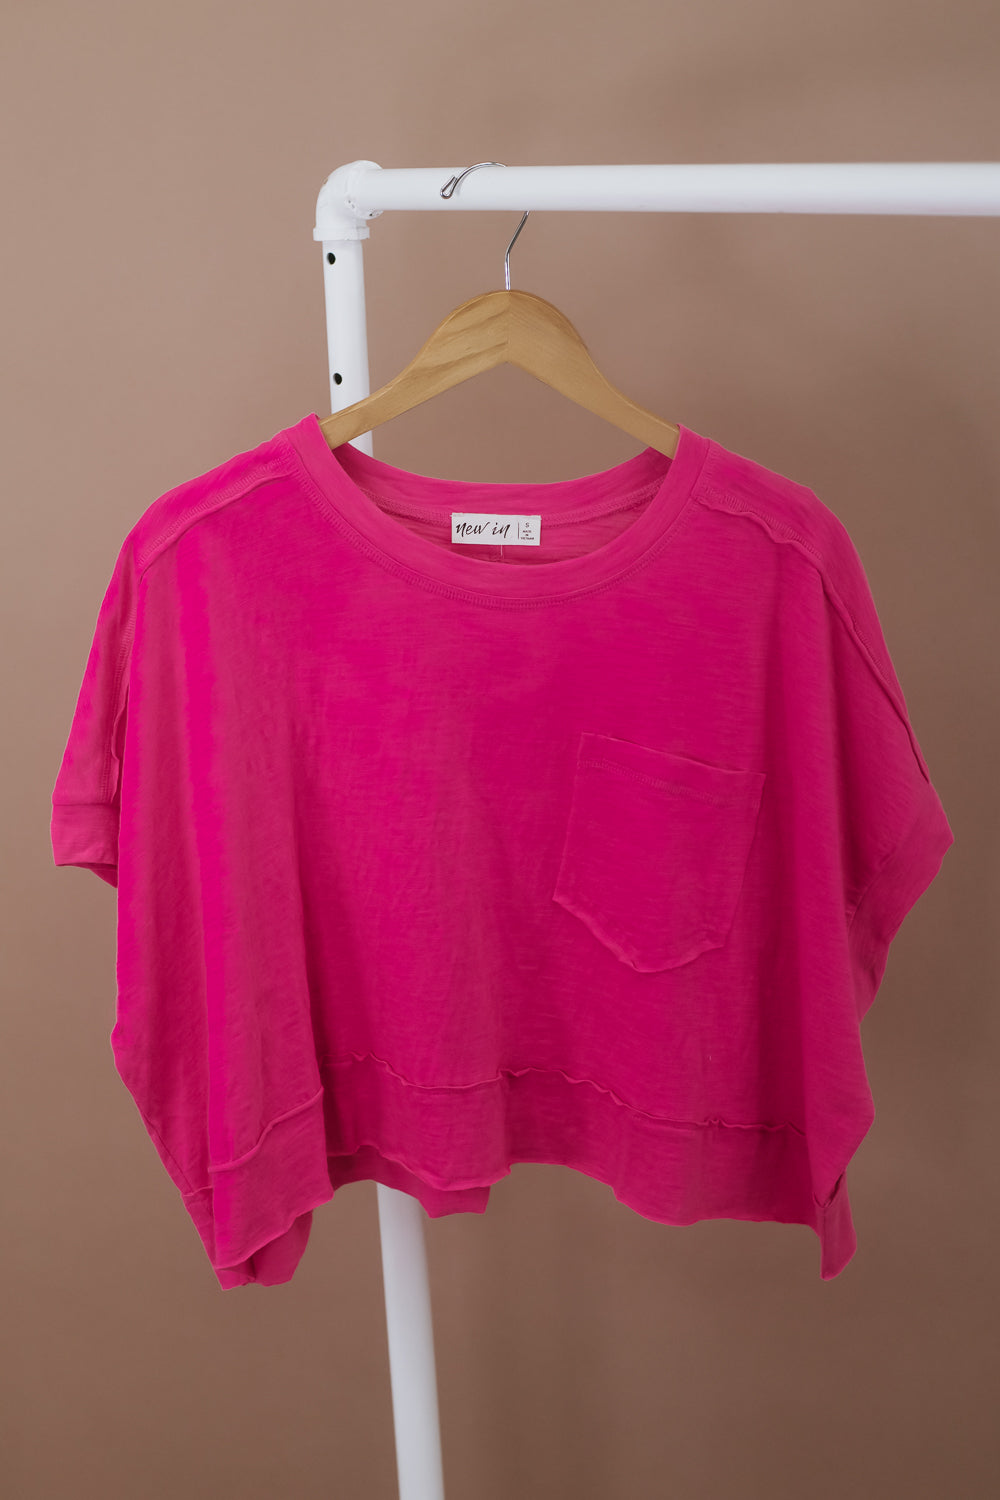 New In Pocket Tee, Hot Pink